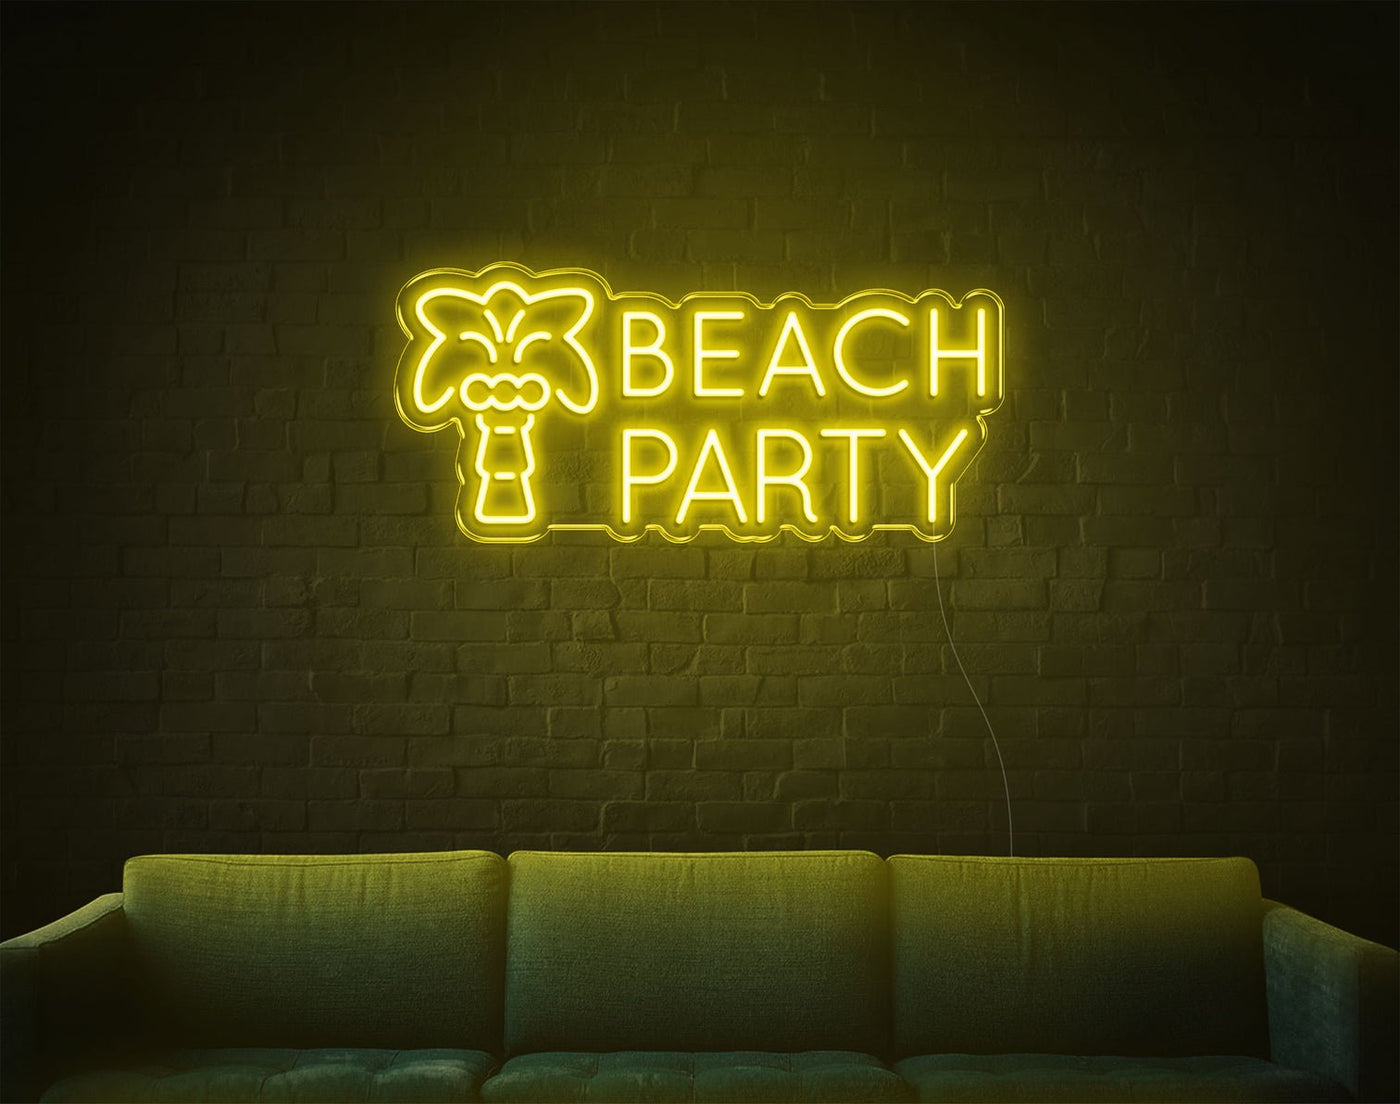 Beach Party LED Neon Sign - 12inch x 26inchYellow